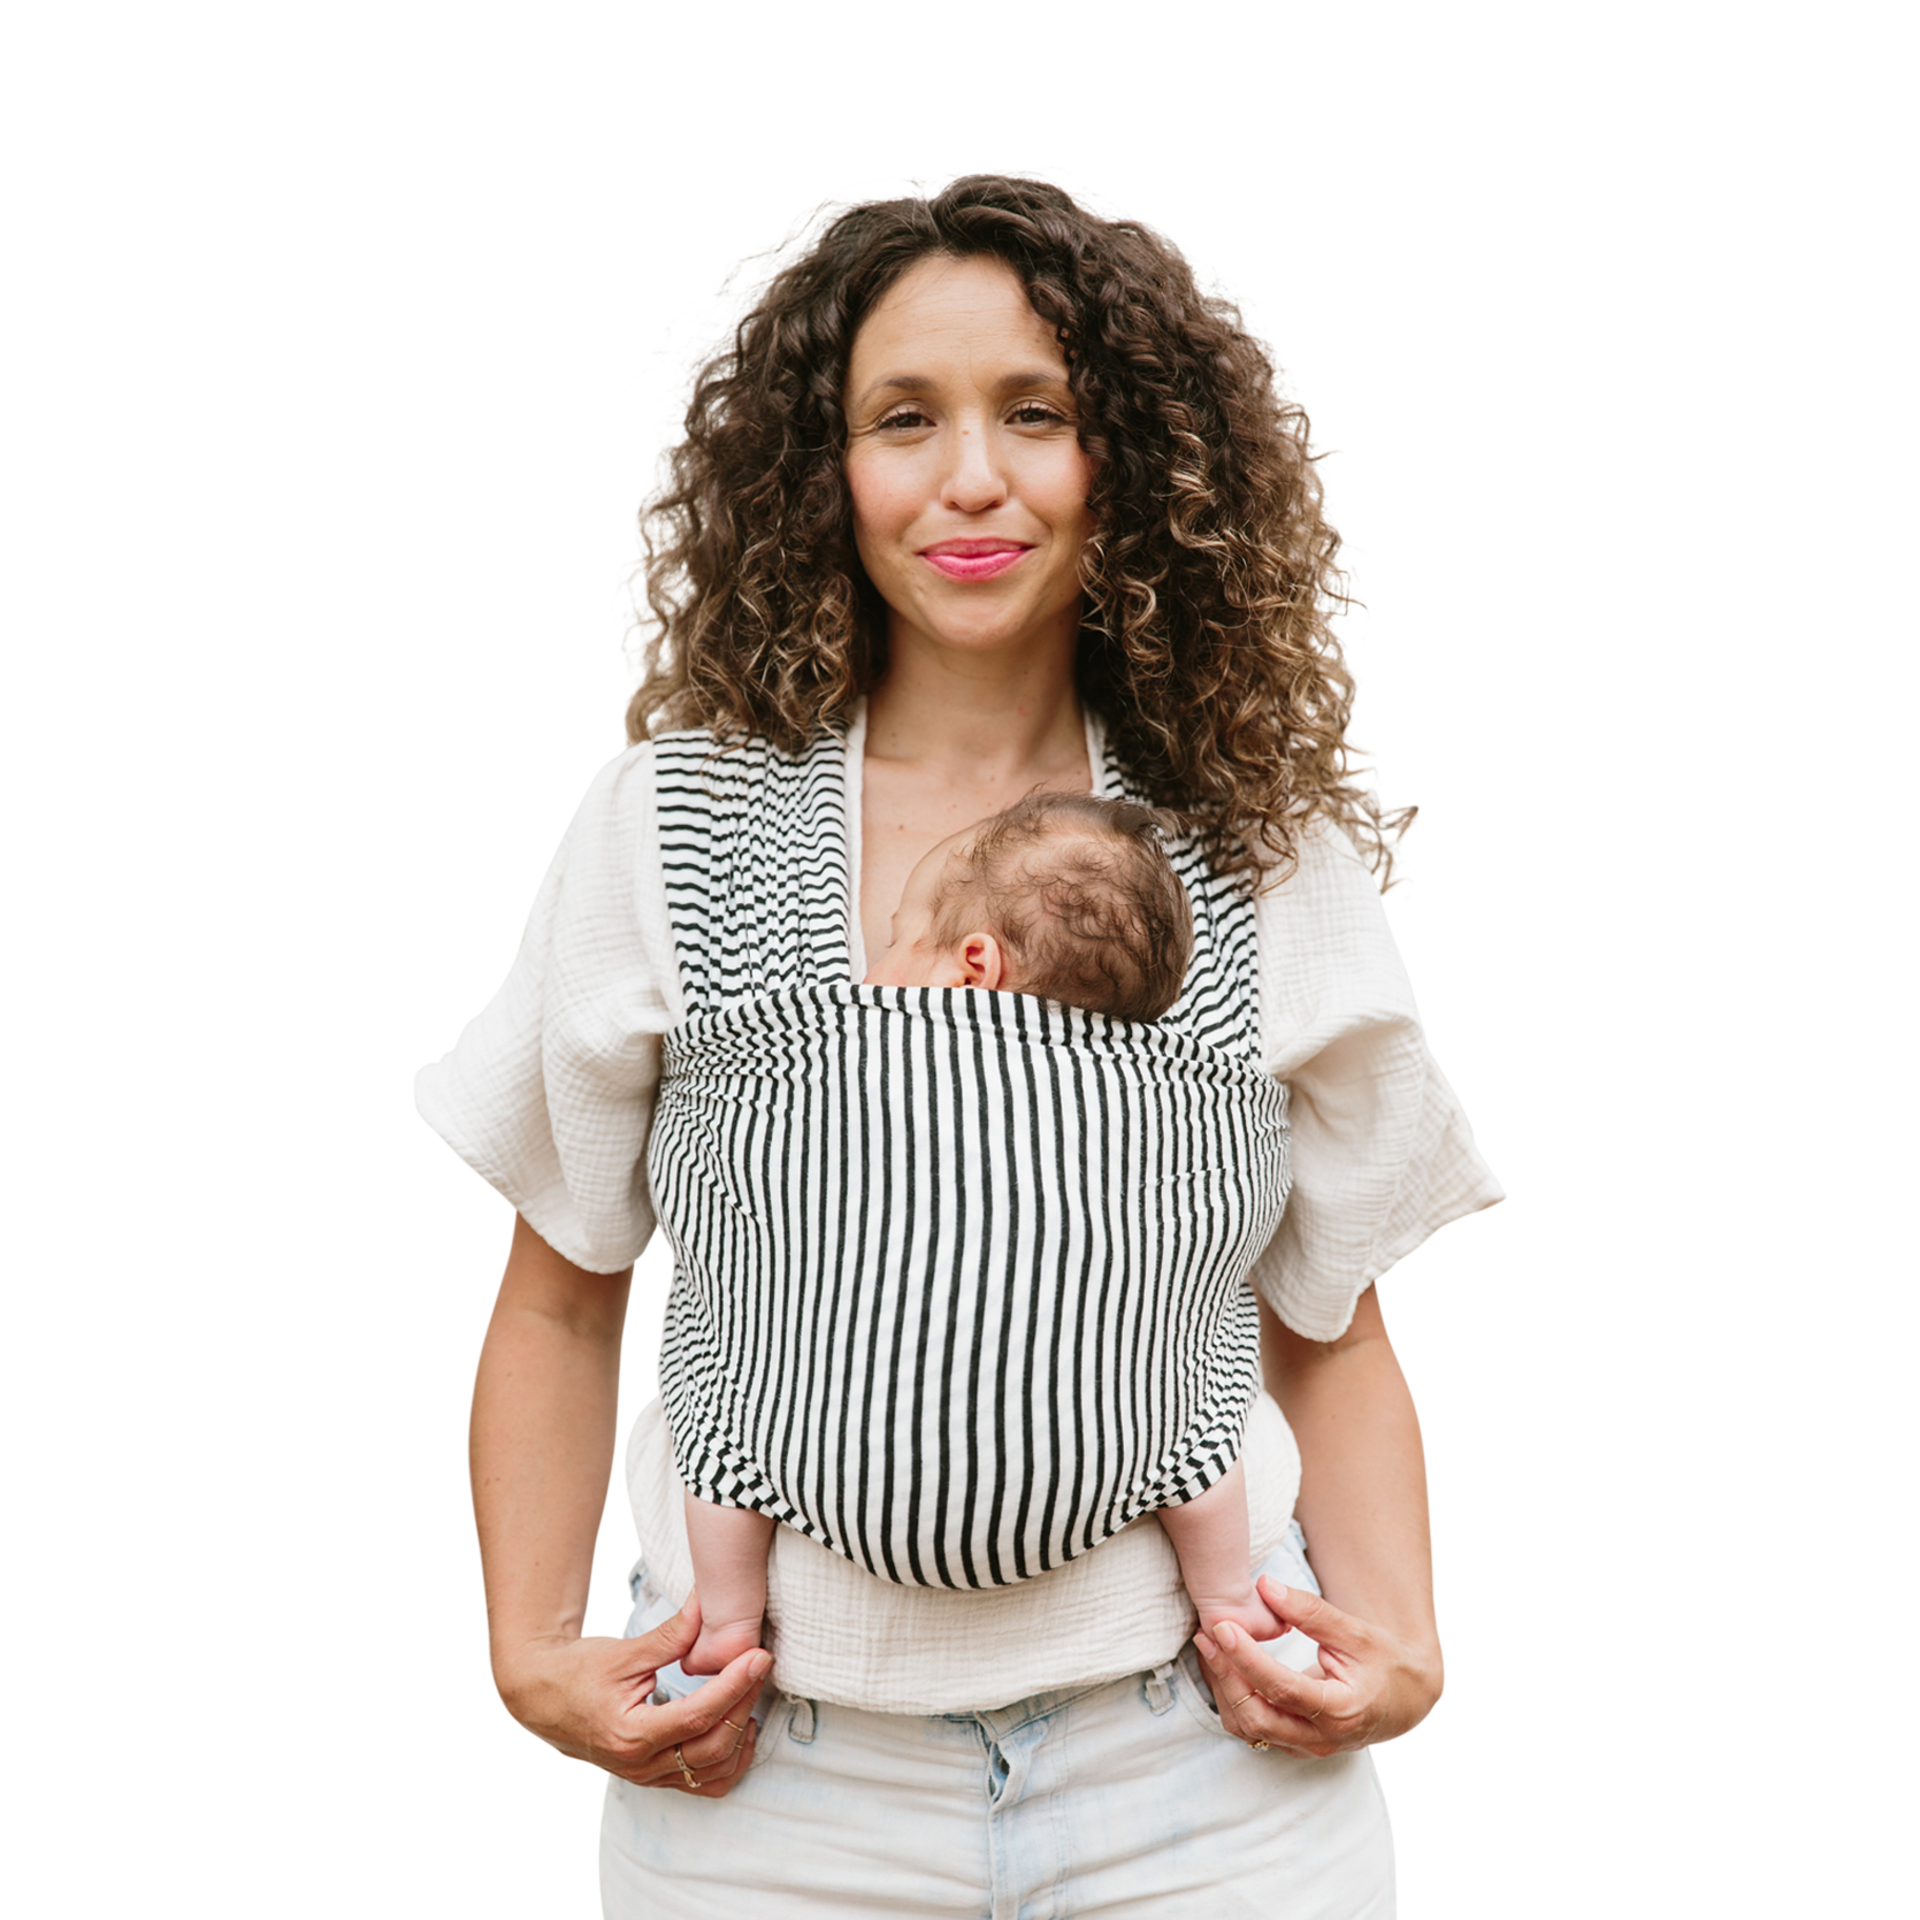 Original Stretchy Infant Sling Black Grey Perfect for Newborn Babies and Children up to 35 lbs BUDOUMAMA Wrap Baby Carrier 